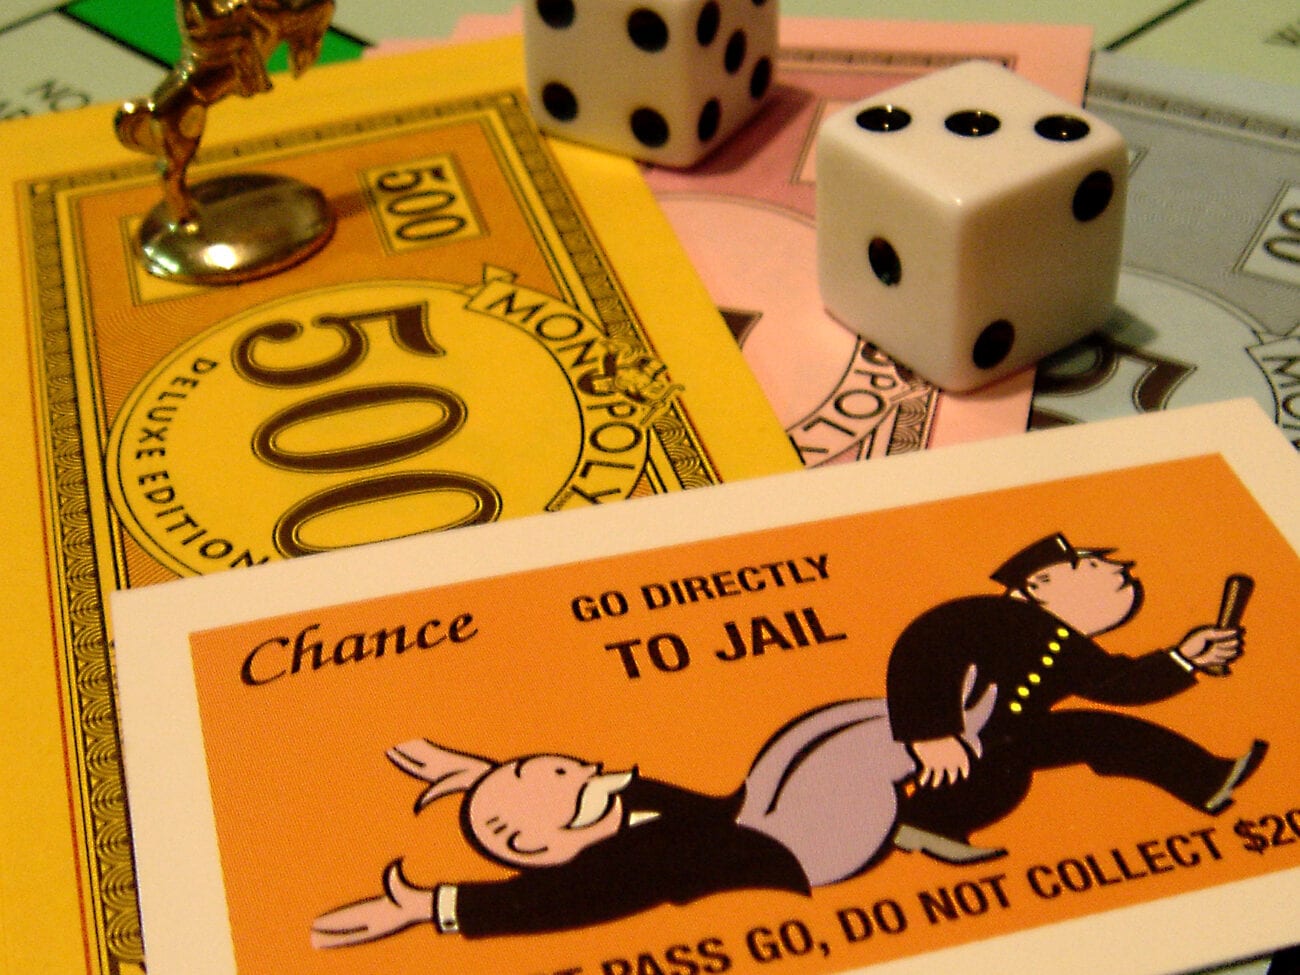 Are you tired of Monopoly and Clue? Need new games to play with friends? Read our list of the best games to spice up your game nights.